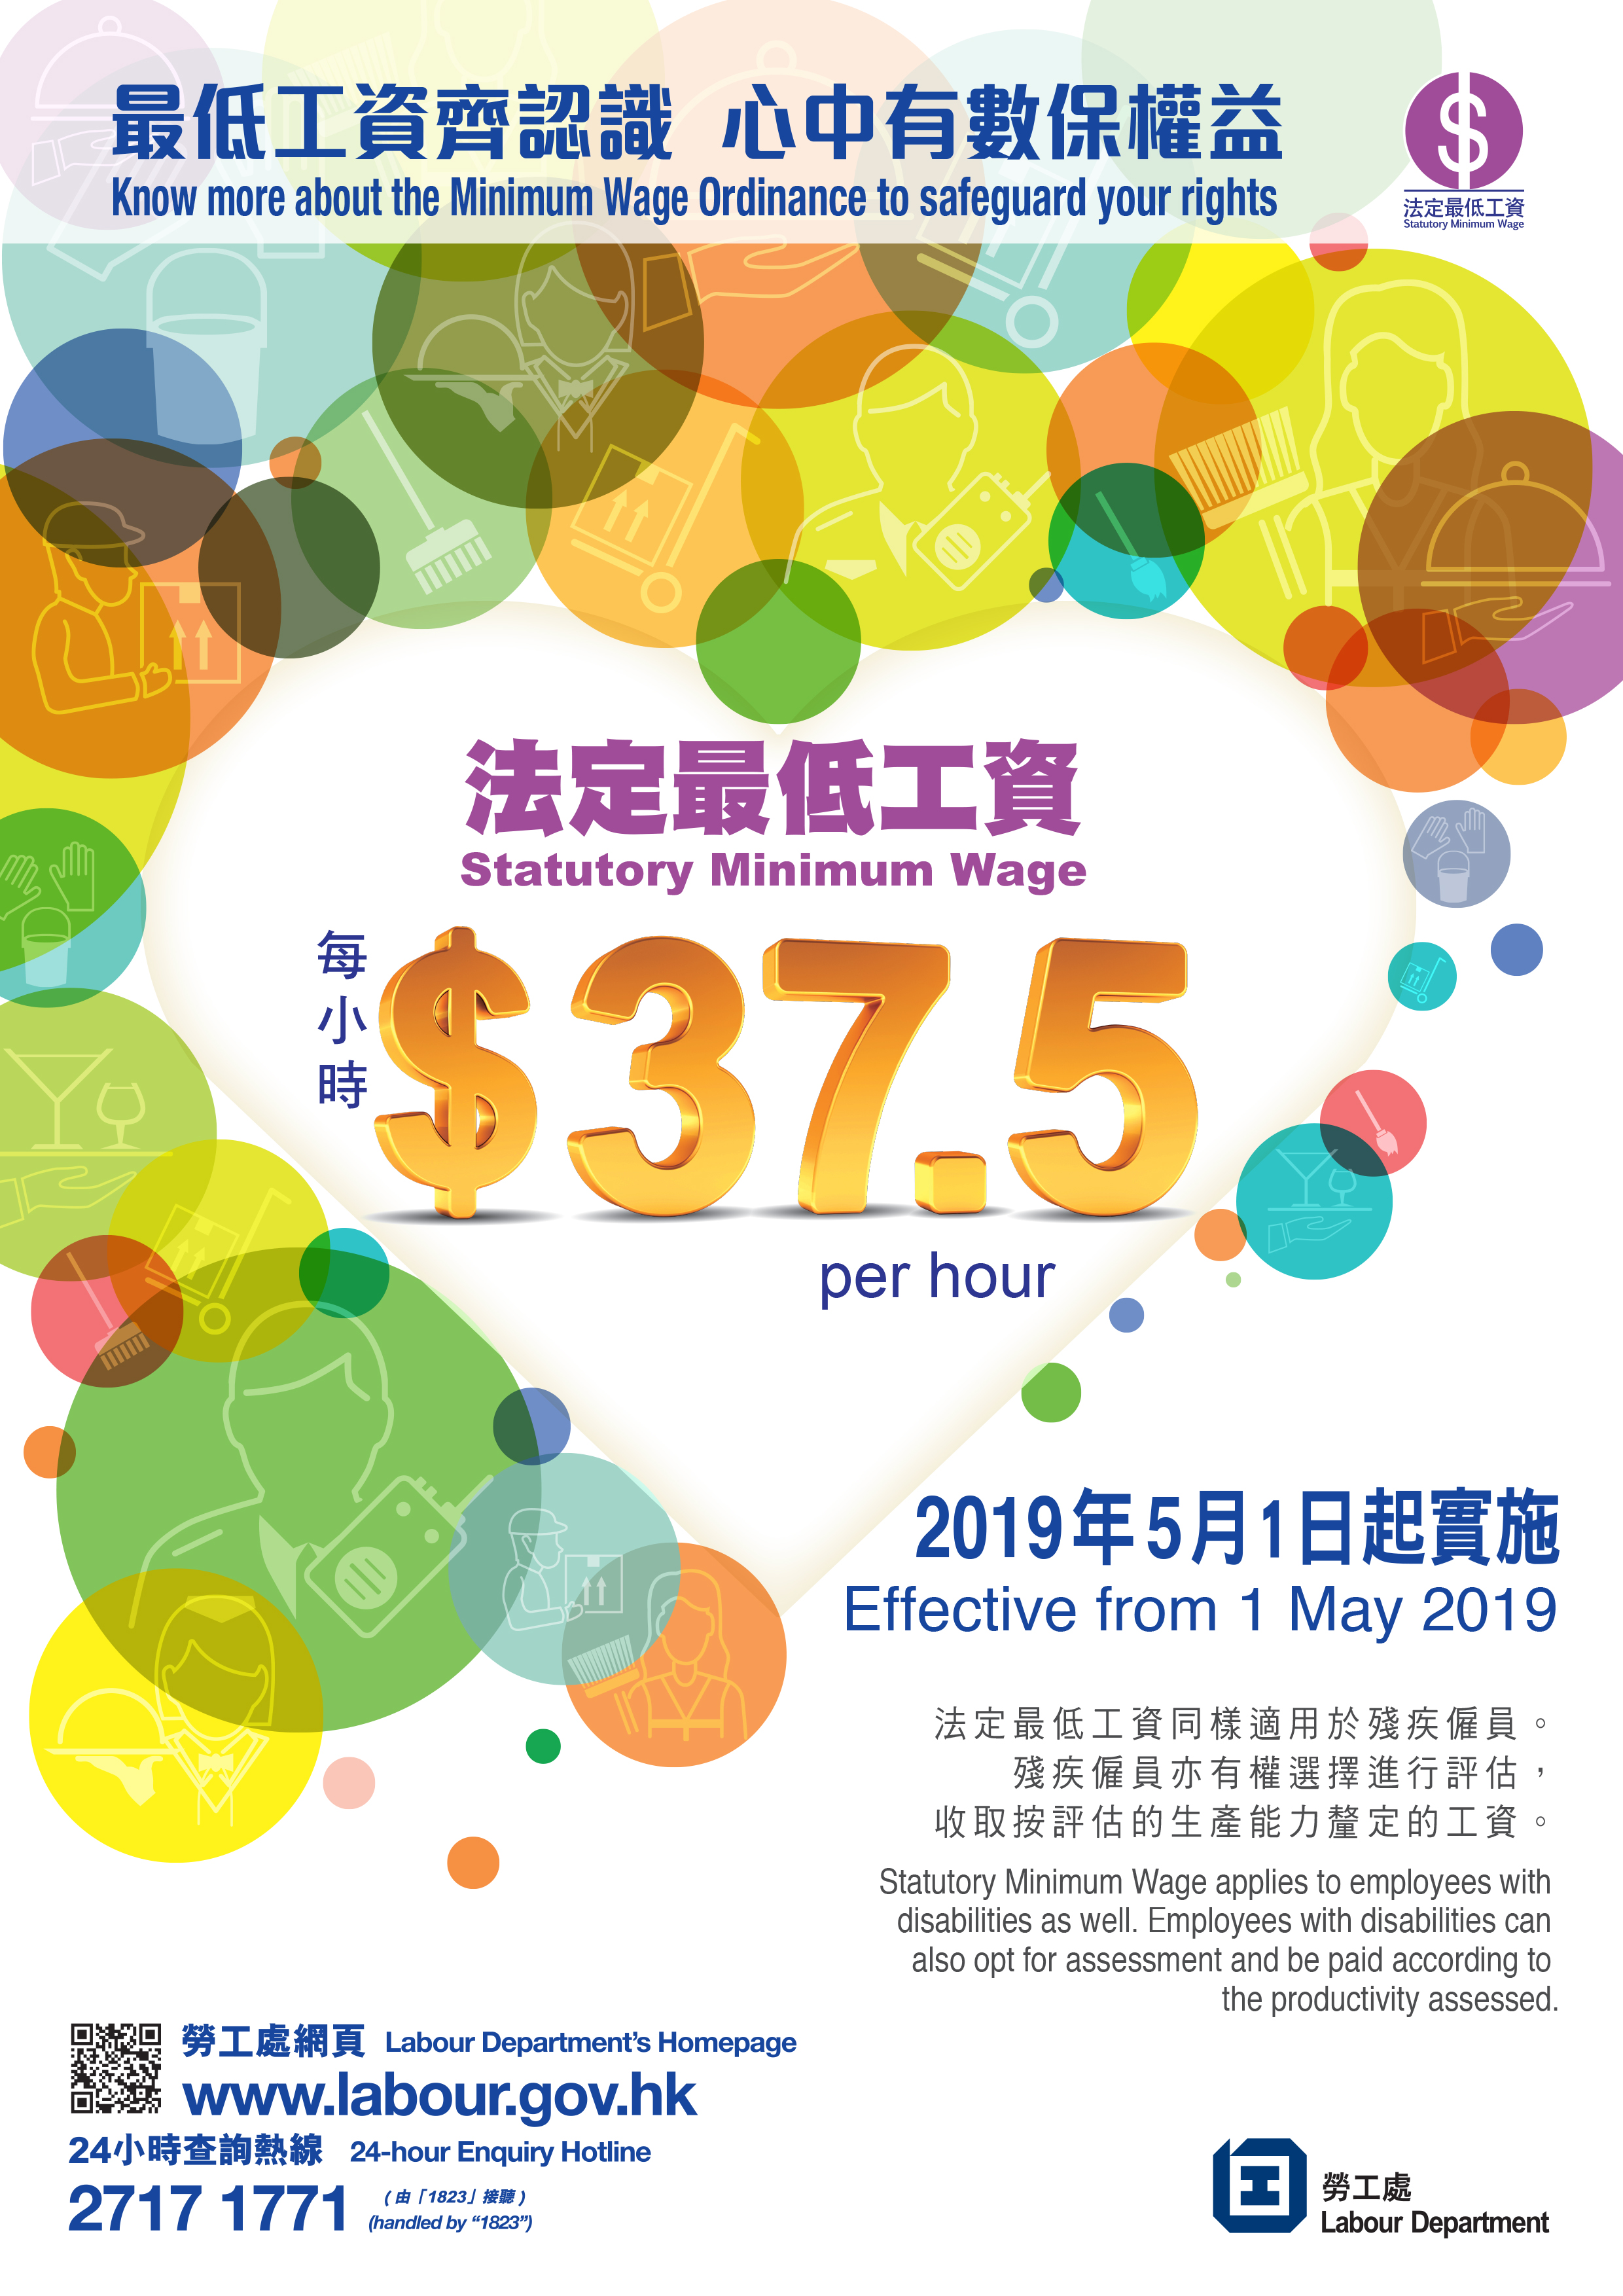 Poster publicising the updated statutory minimum wage, featuring the figures "$37.5" in bright yellowish orange